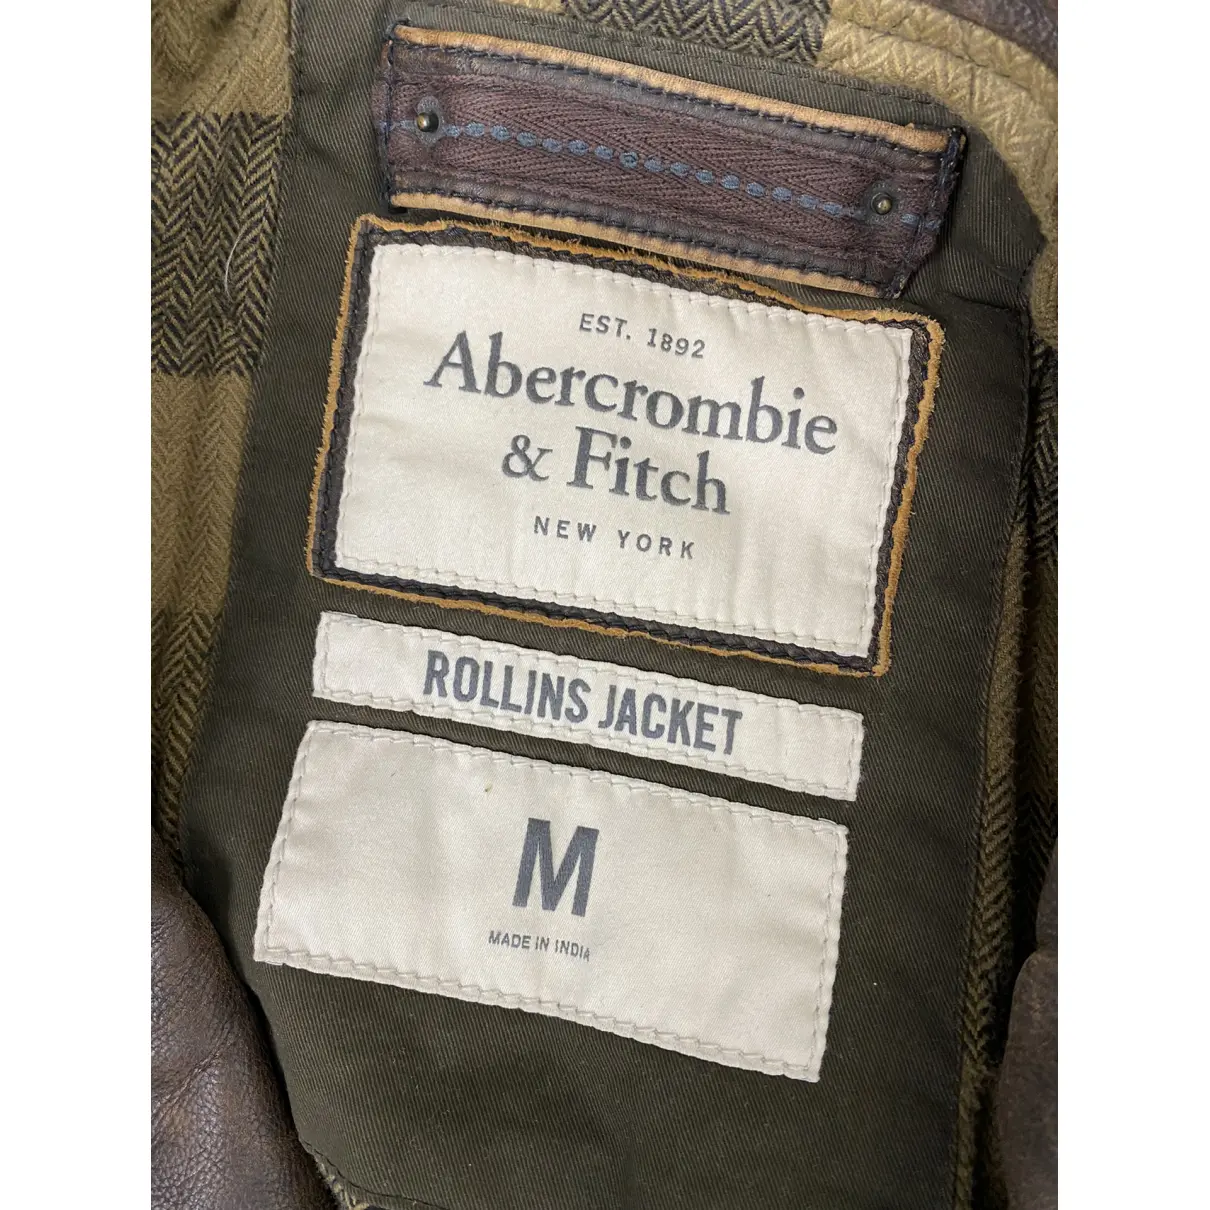 Leather jacket Abercrombie & Fitch